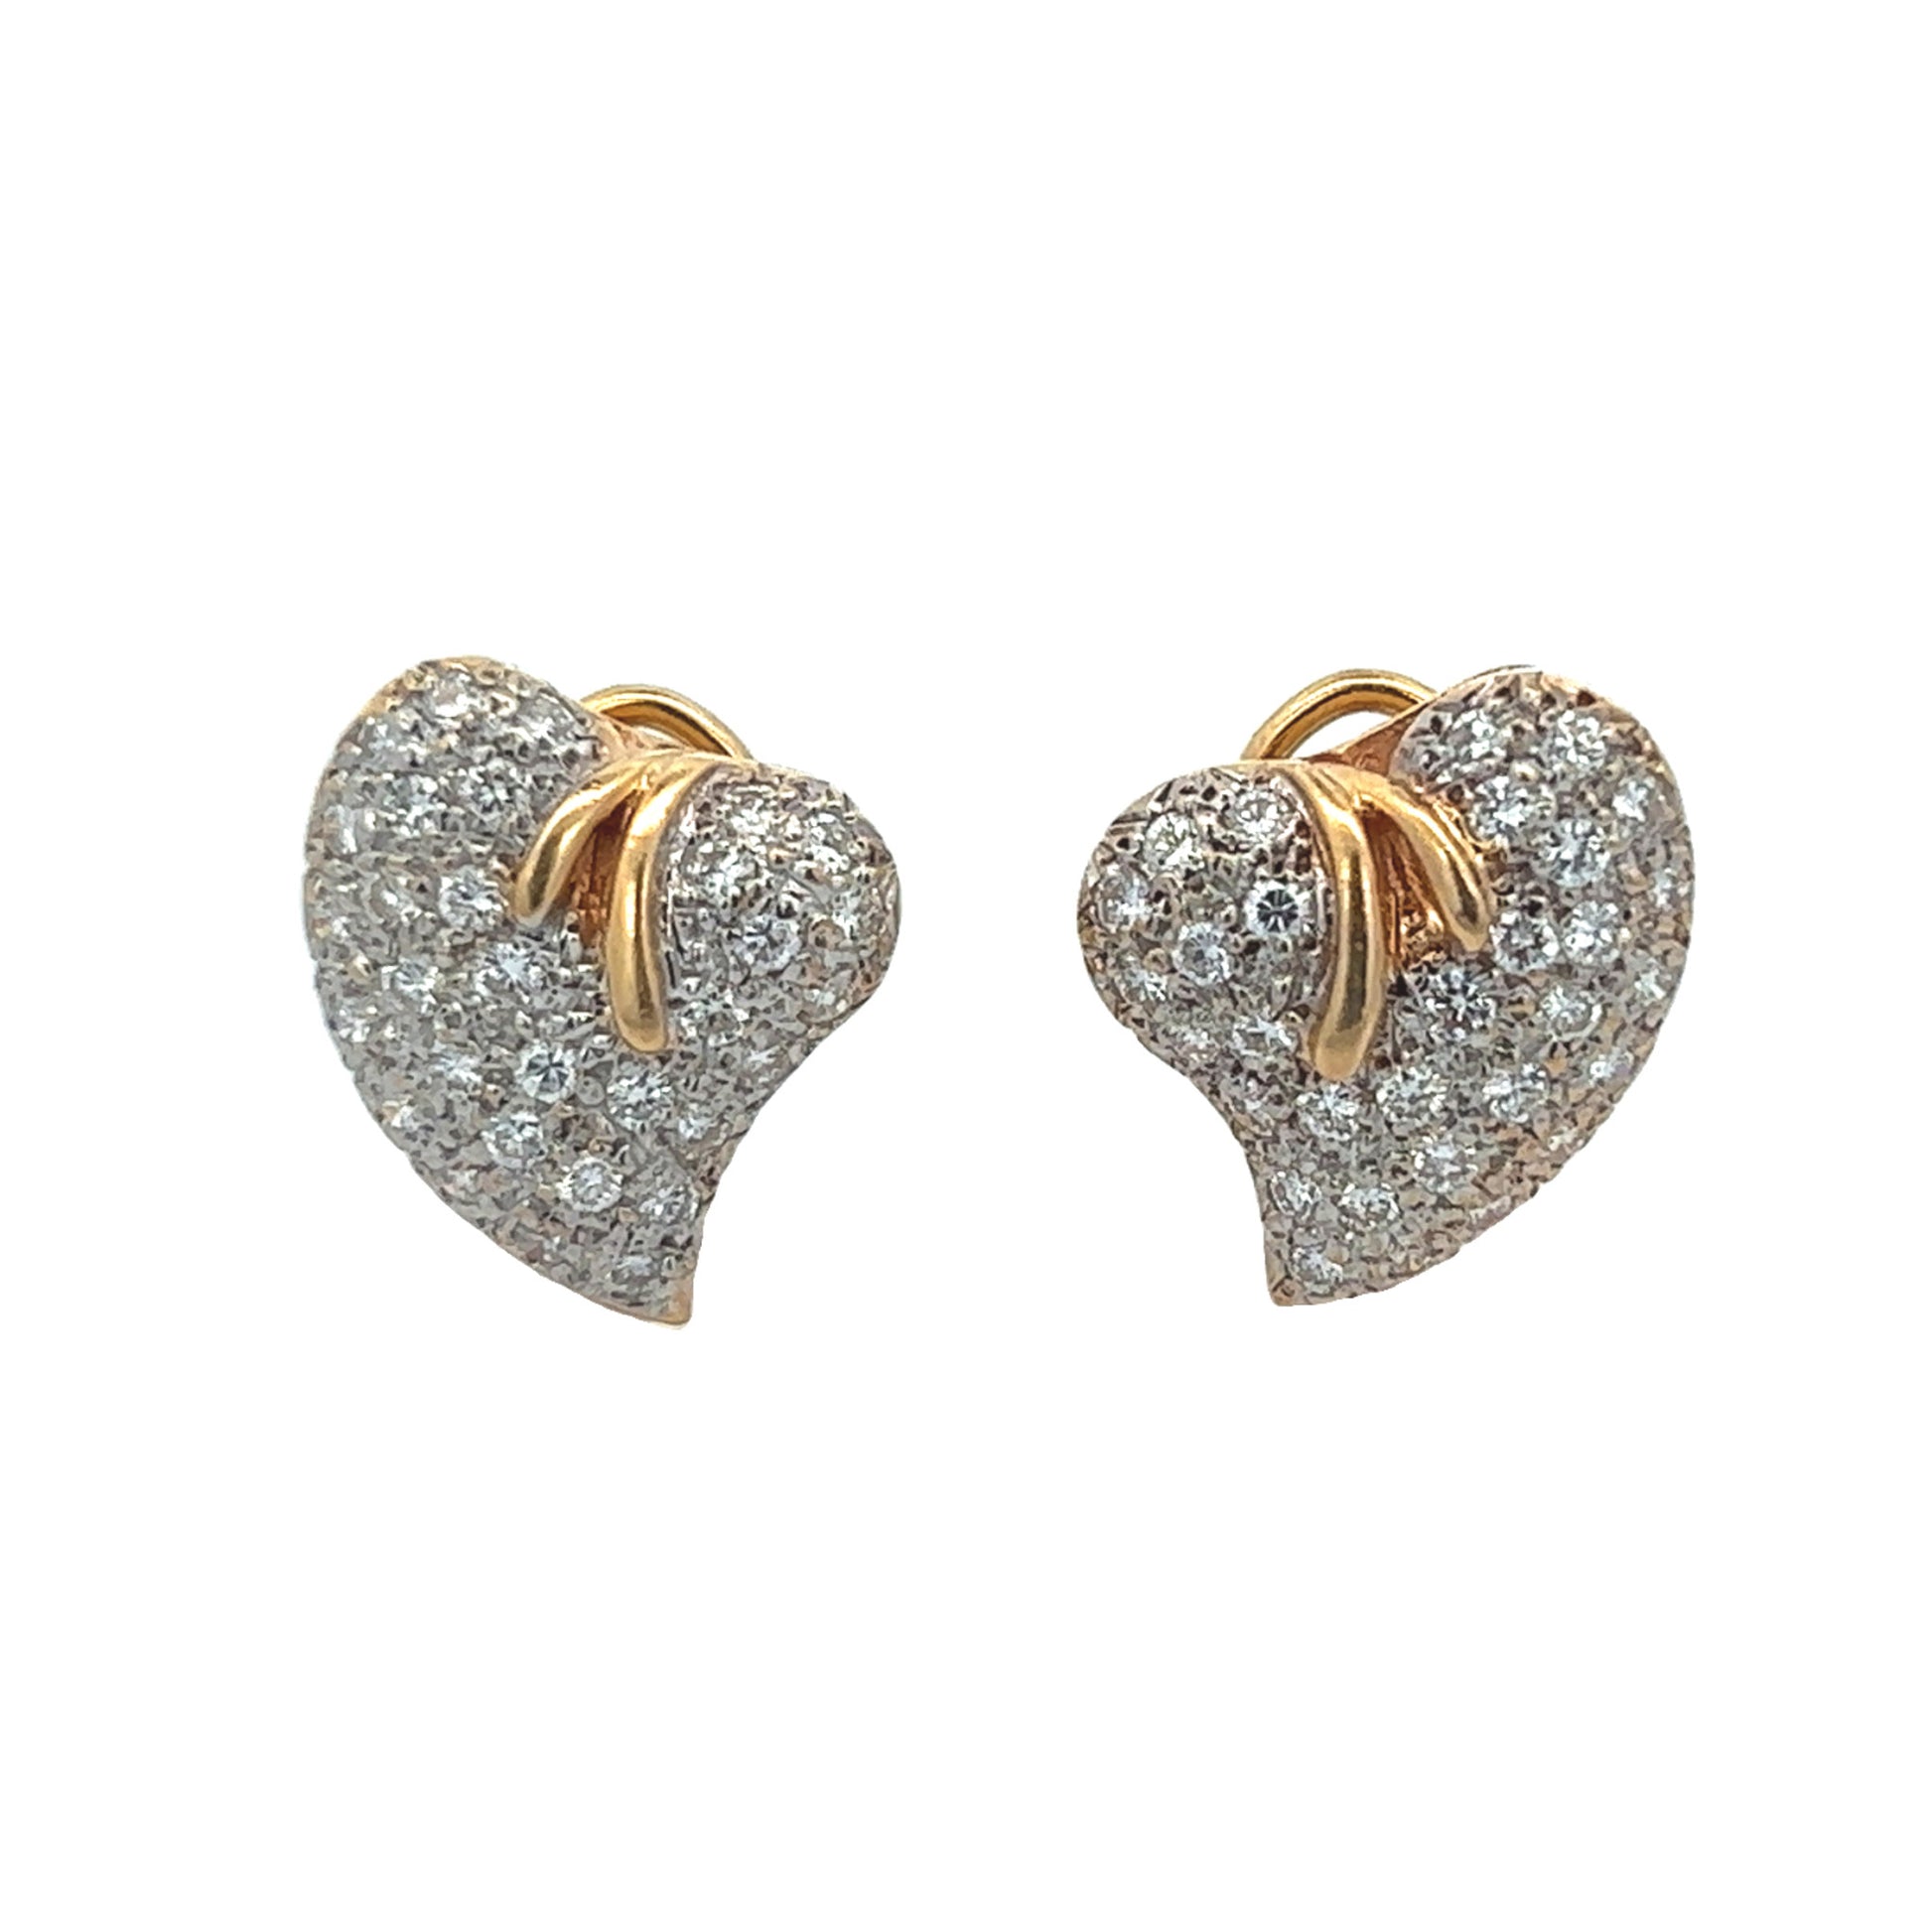 1970s 14KT Yellow Gold Diamond Earrings front view